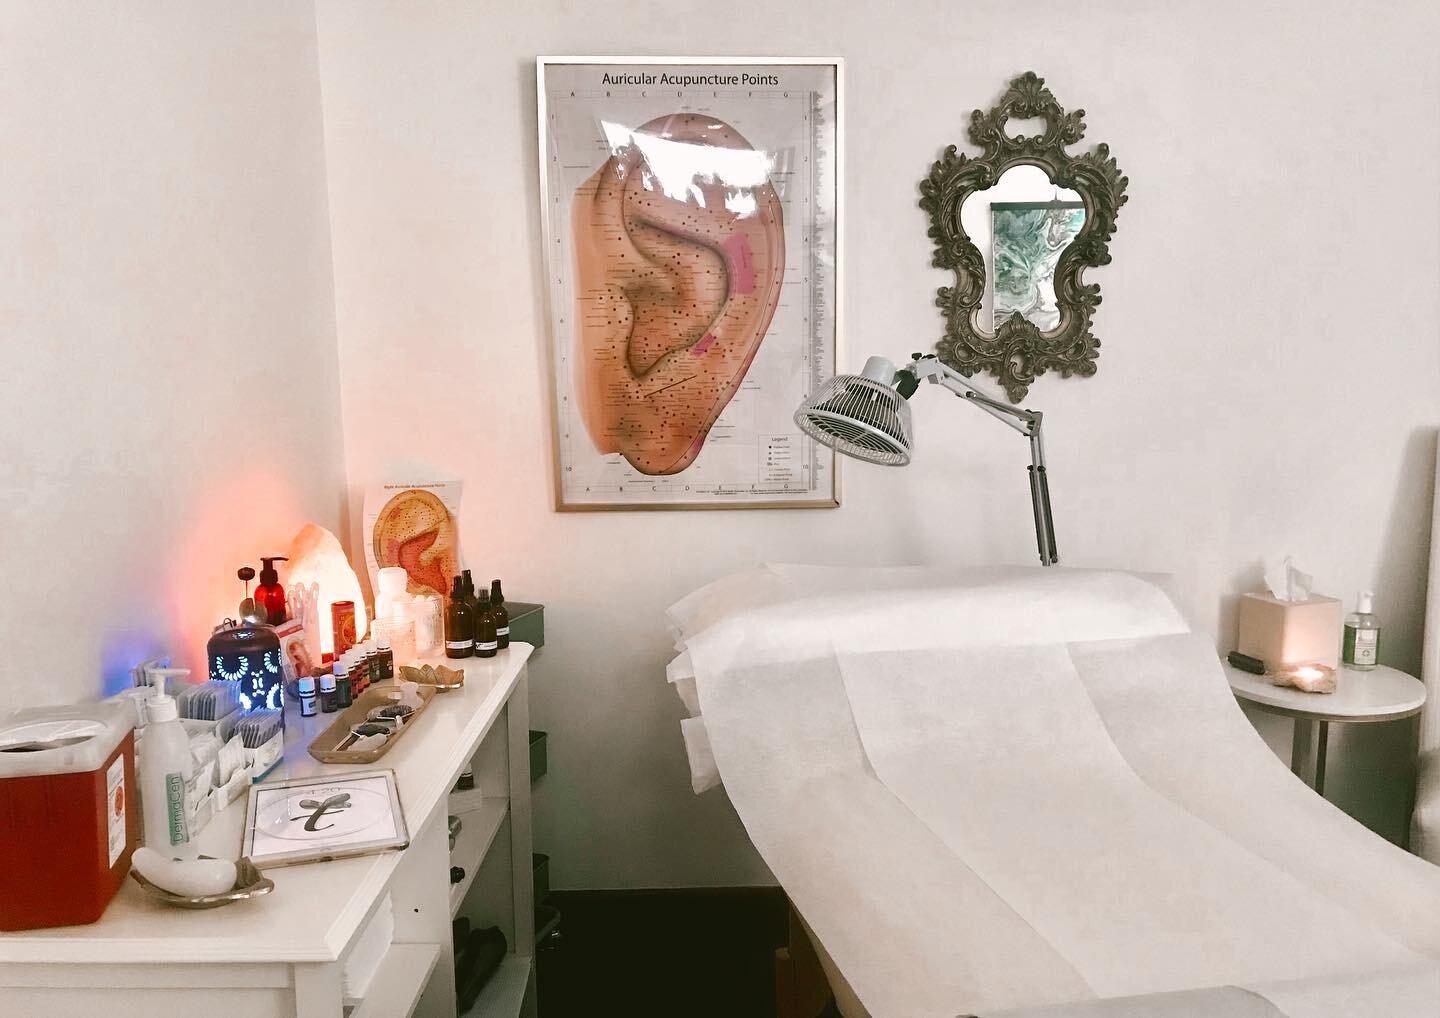 treatment room! aka a safe space for healing✨ in this room, during an acupuncture session: the body calms down &bull; muscles loosen &bull; the mind takes a break &bull; pain reduces &bull; stress leaves... ⁣
⁣
@lodiacupuncture